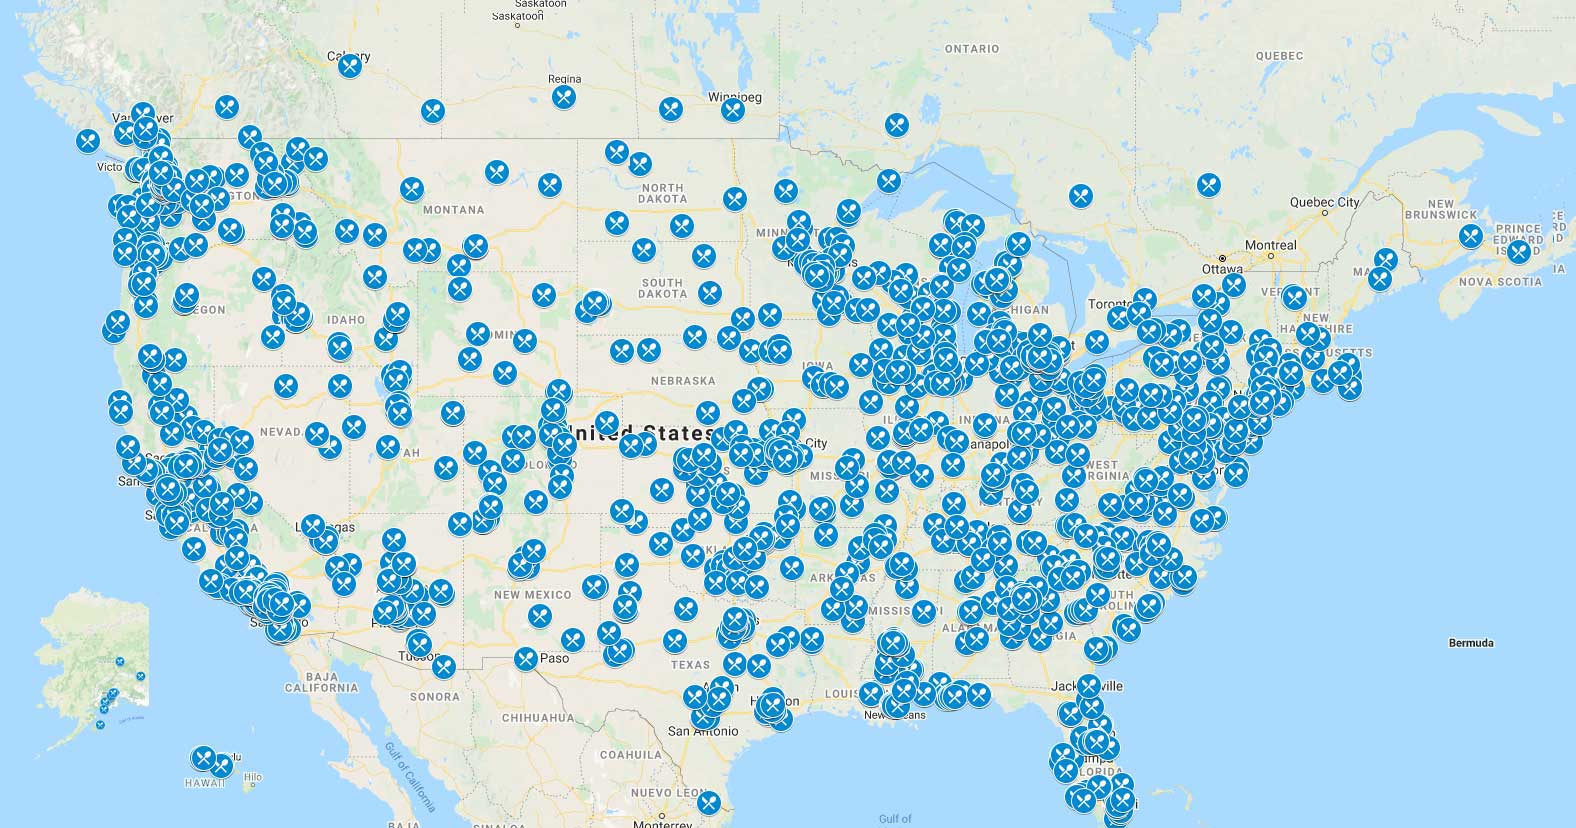 A map of the United States with customer locations